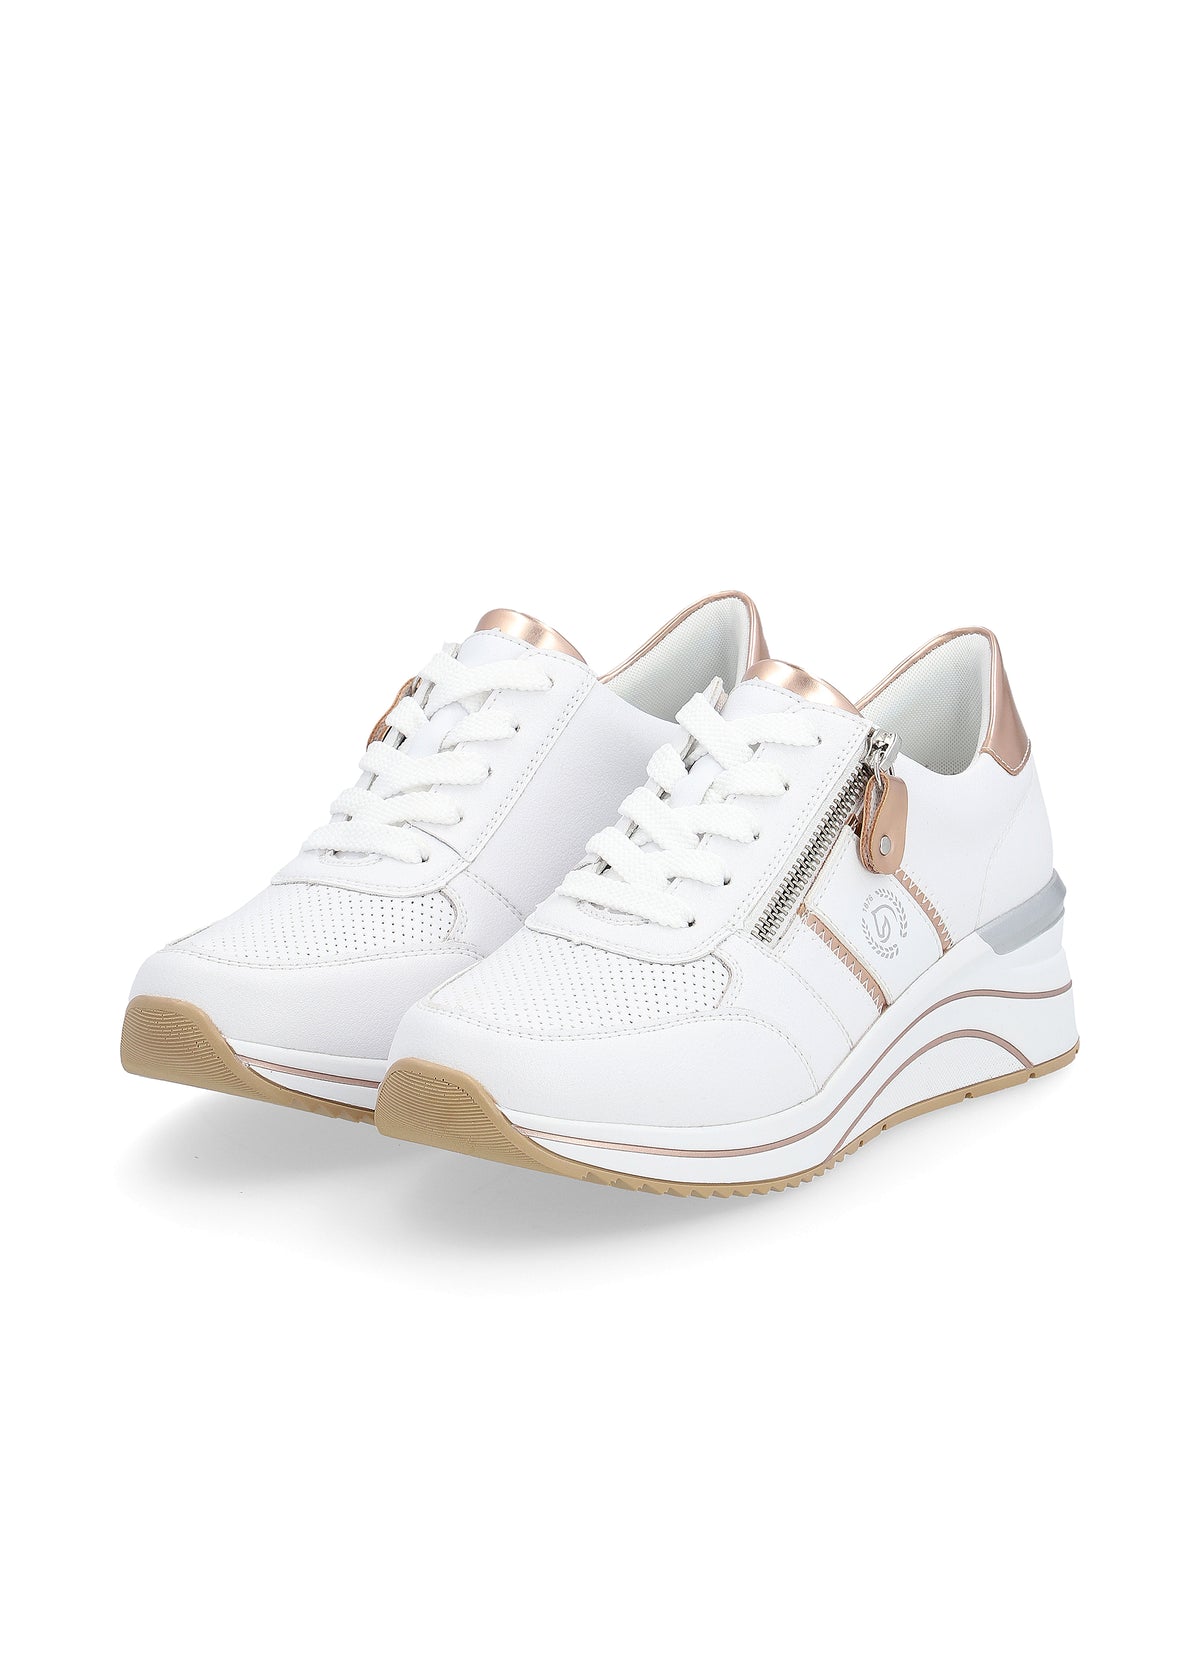 Sneakers with a wedge sole - white, copper-colored details